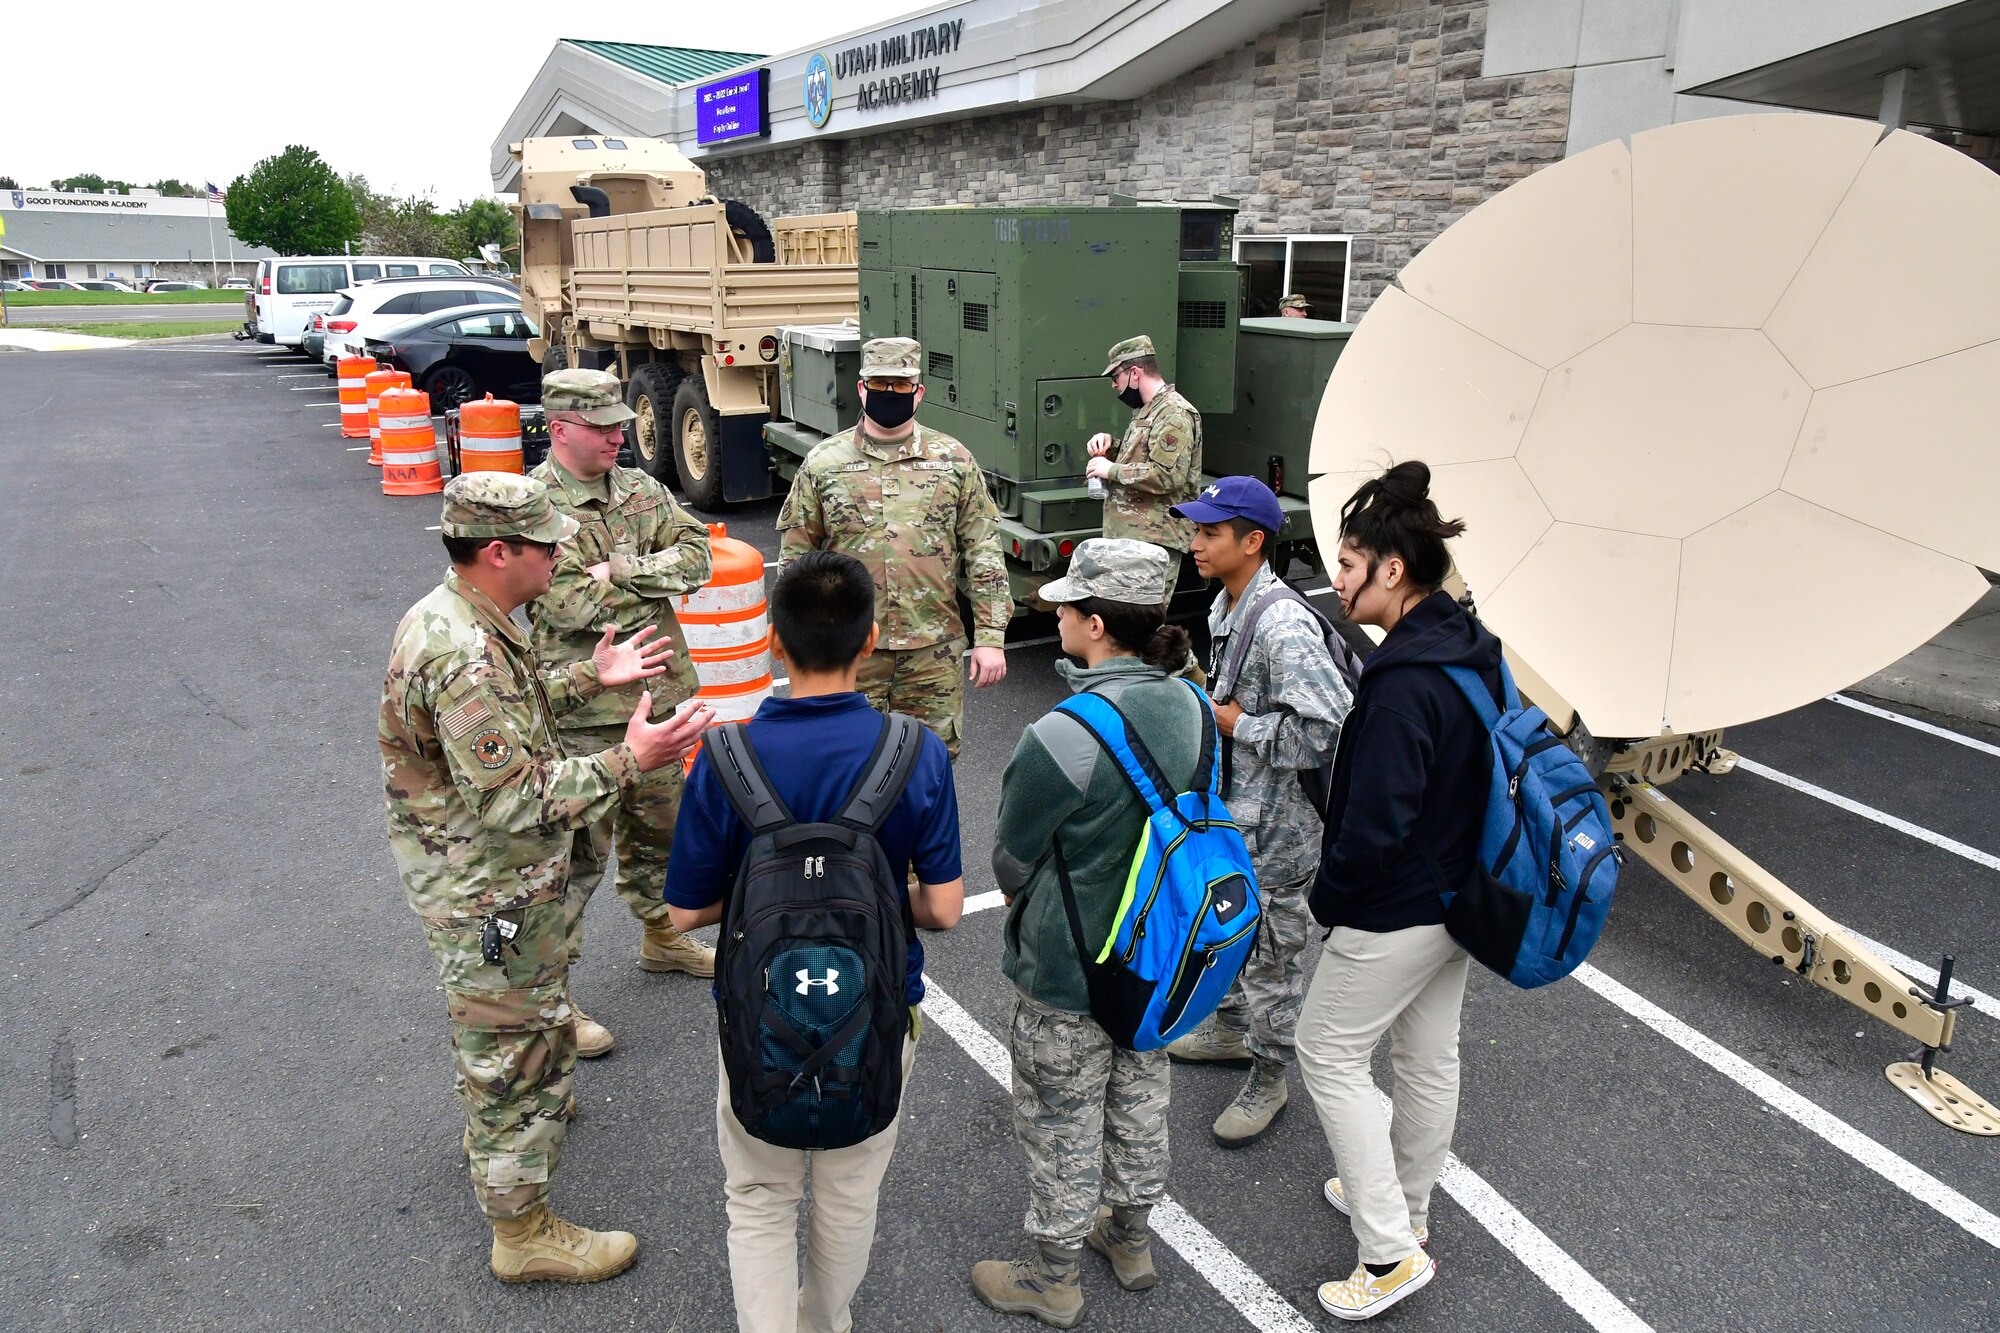 Staff Sgt. Anthony Bauc, 729th Air Control Squadron, discusses mobile radar equipment with students during a job fair at the Utah Military Academy, May 25, 2021, in Riverdale, Utah. Airmen from Hill Air Force Base recently hosted the event at the nearby charter high school to educate and inspire students, as well as promote interest in the possibility of future military careers. (U.S. Air Force photo by Todd Cromar)